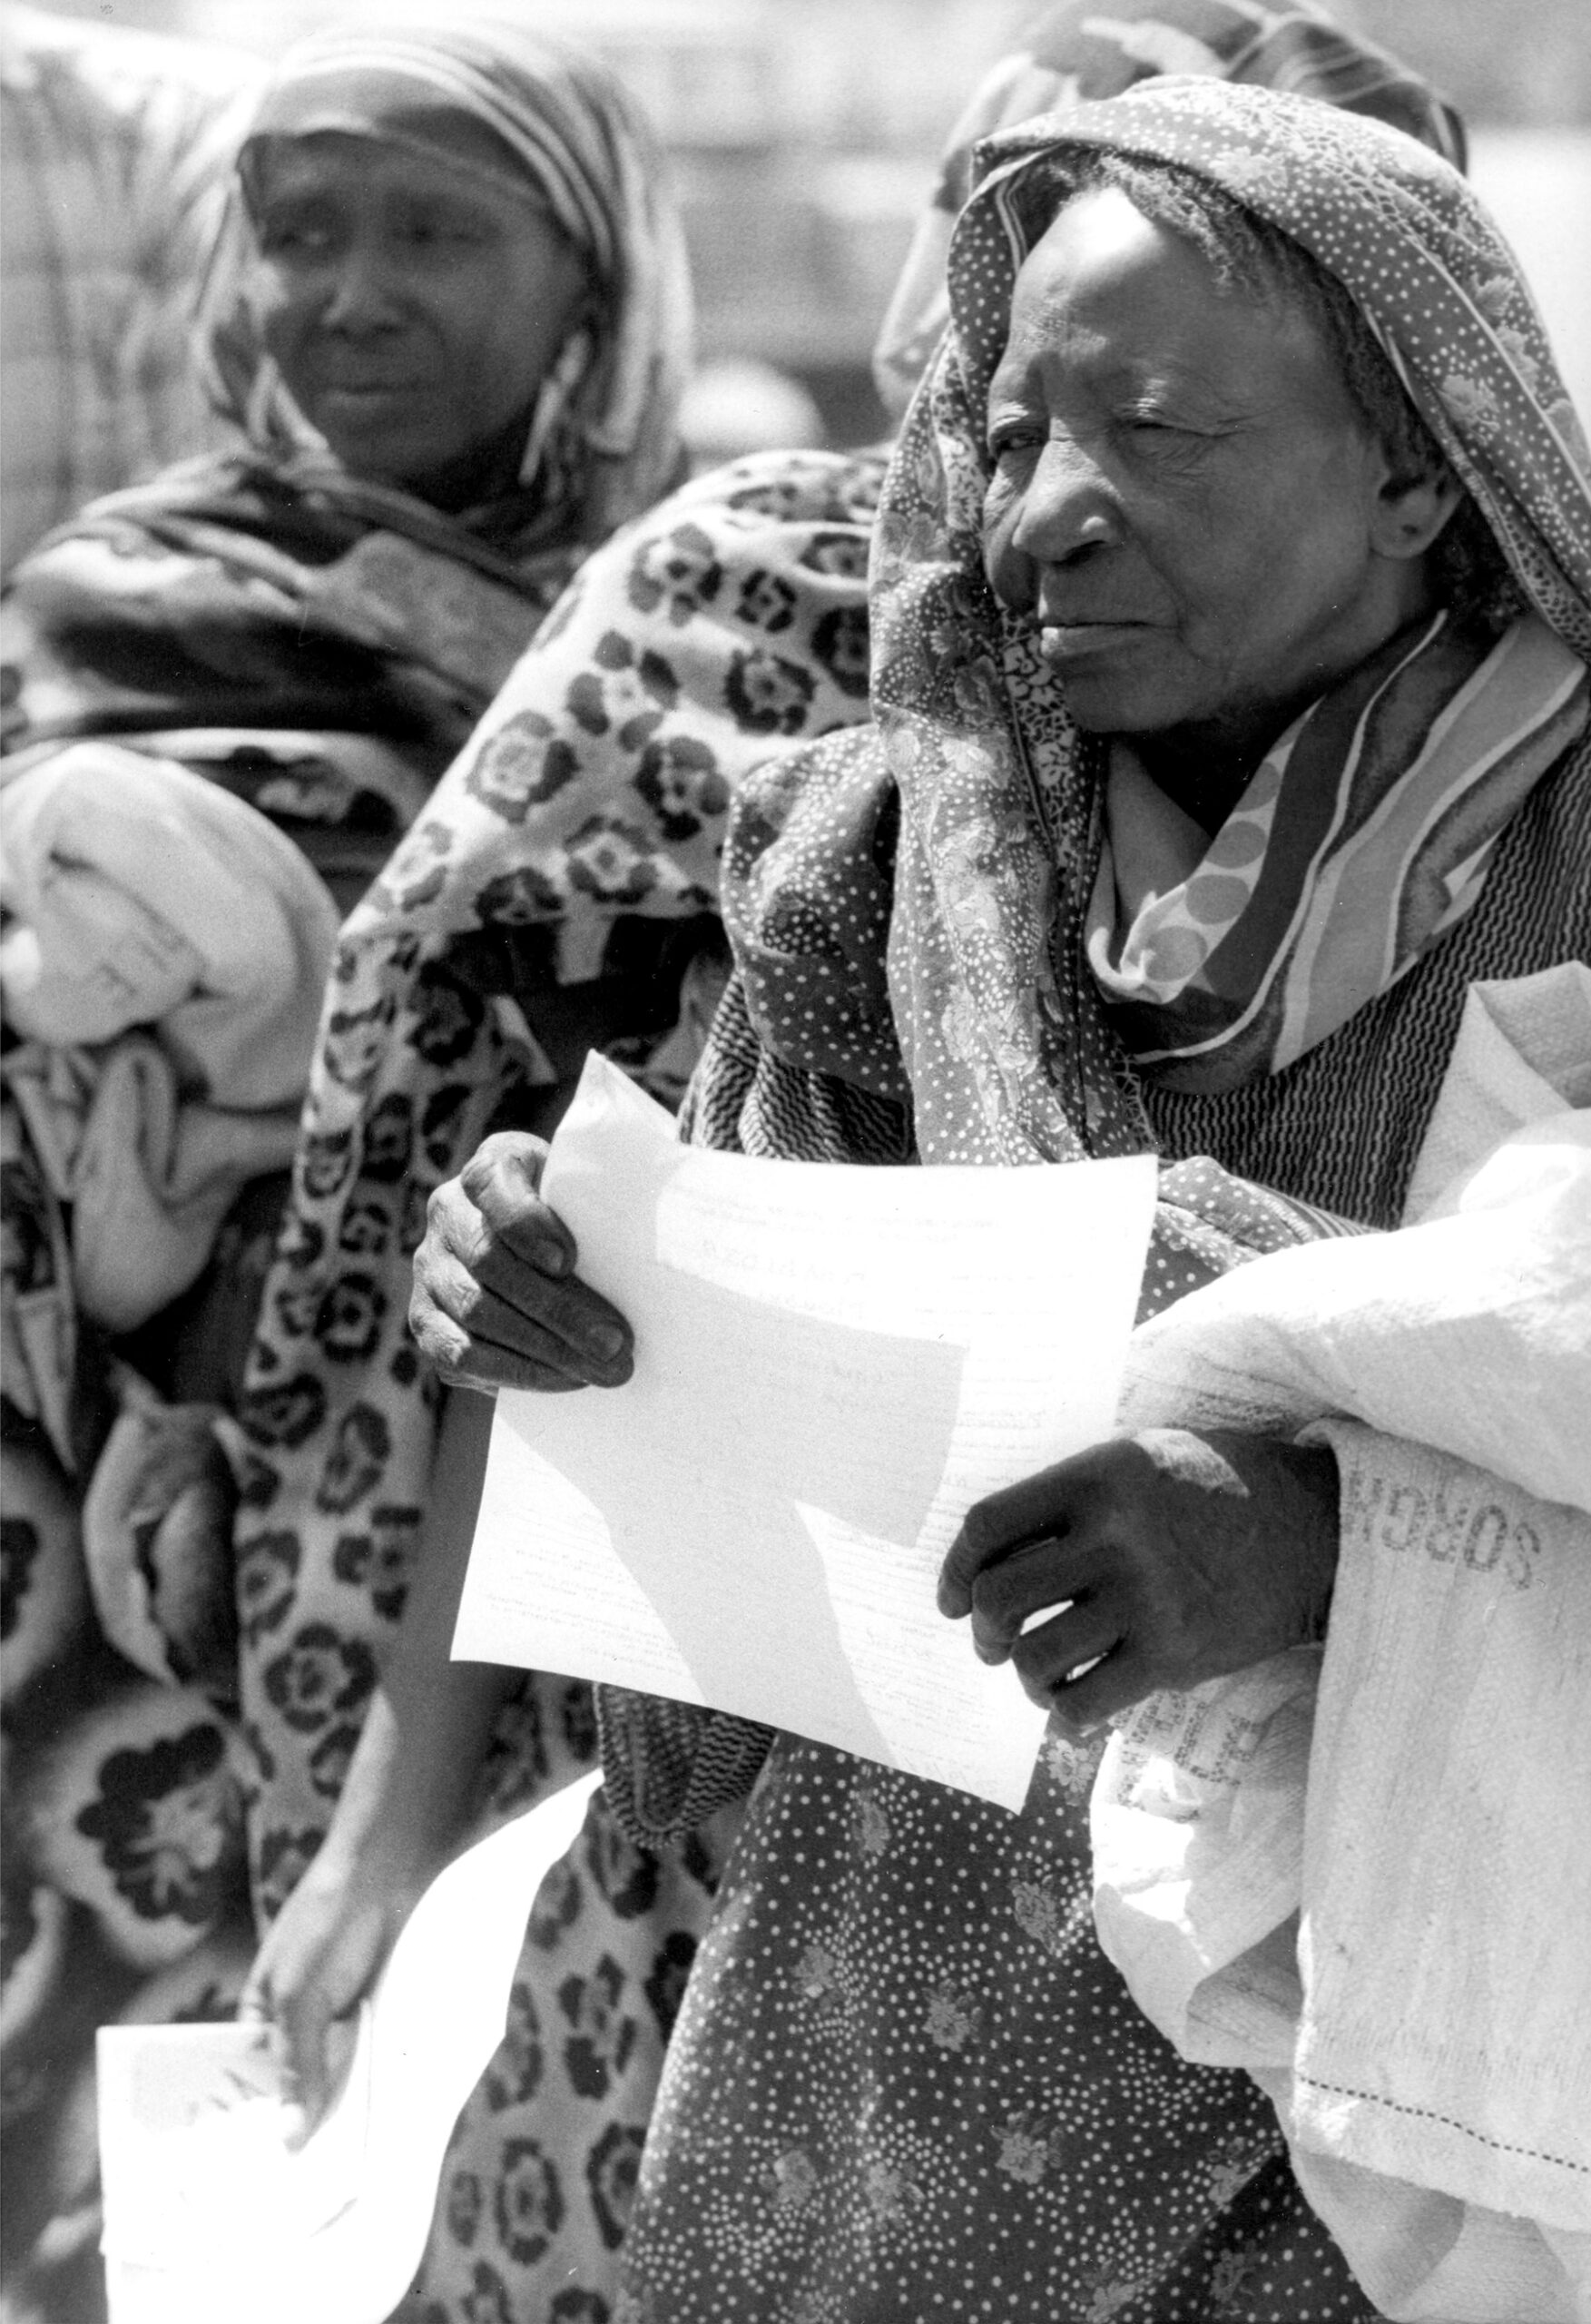 Women at Kousseri refugee camp in Cameroon prepare to be repatriated to Chad, 1981. Original Black and white picture